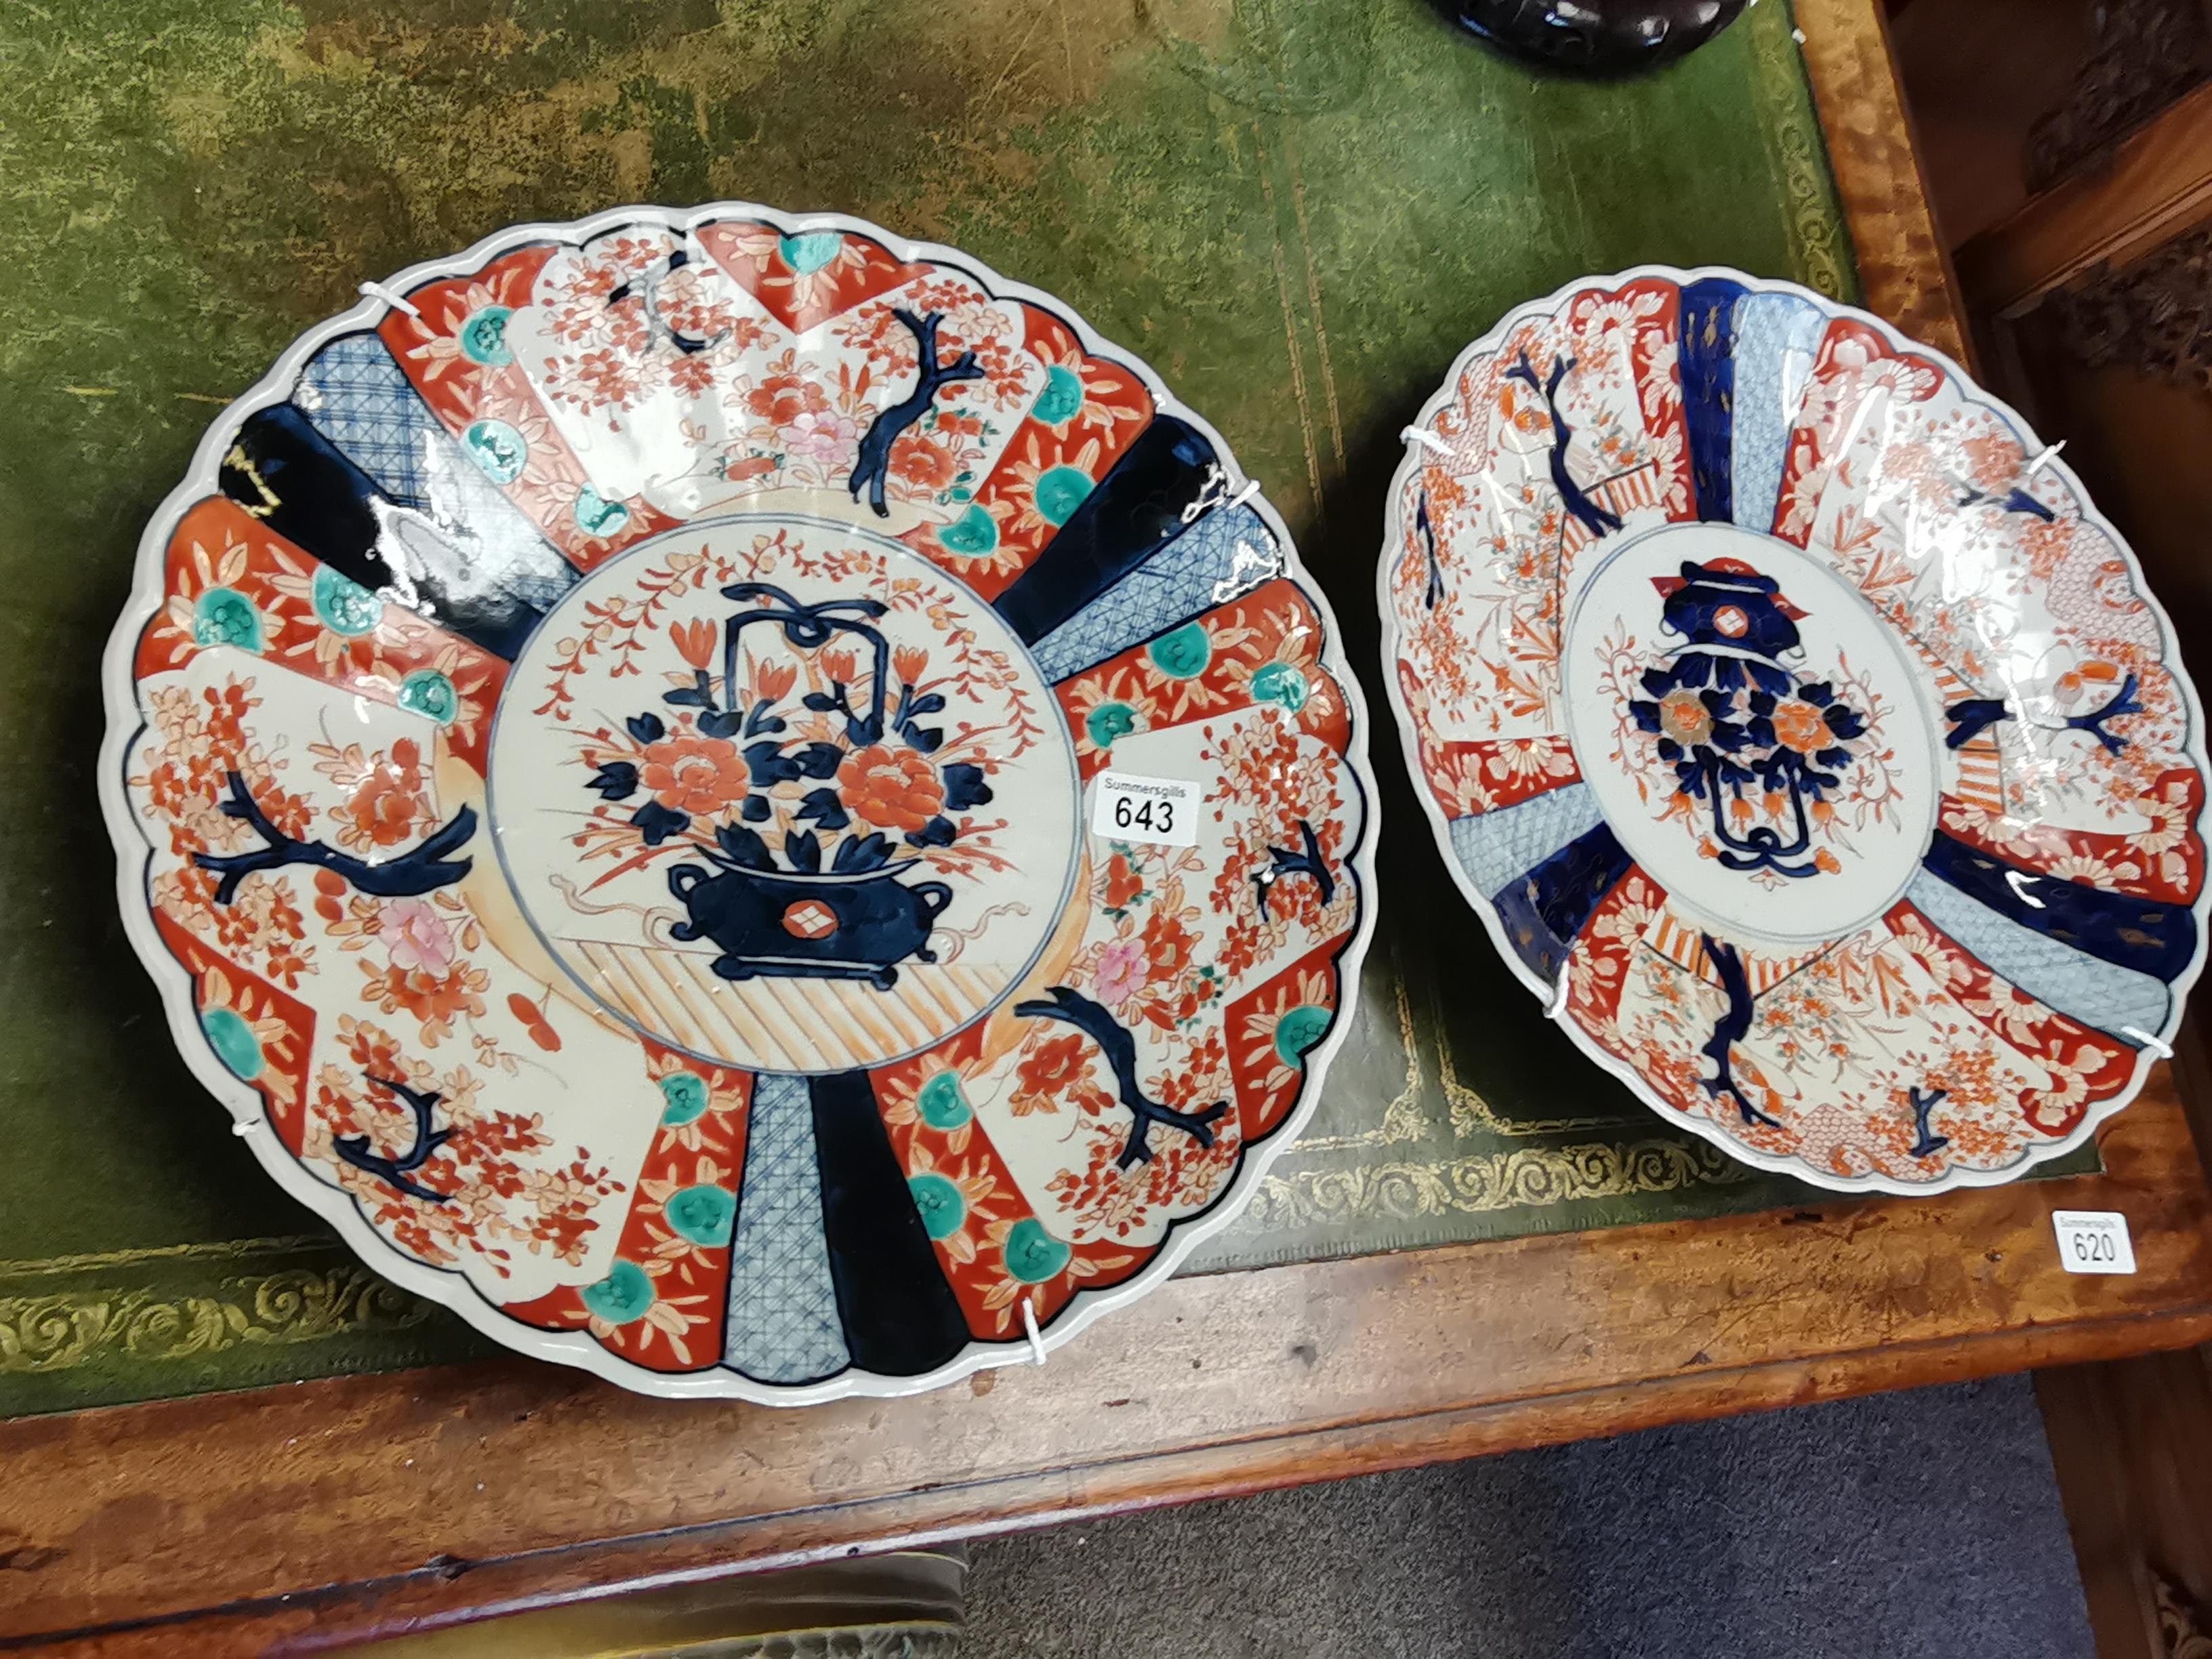 A pair of Japanese Imari chargers